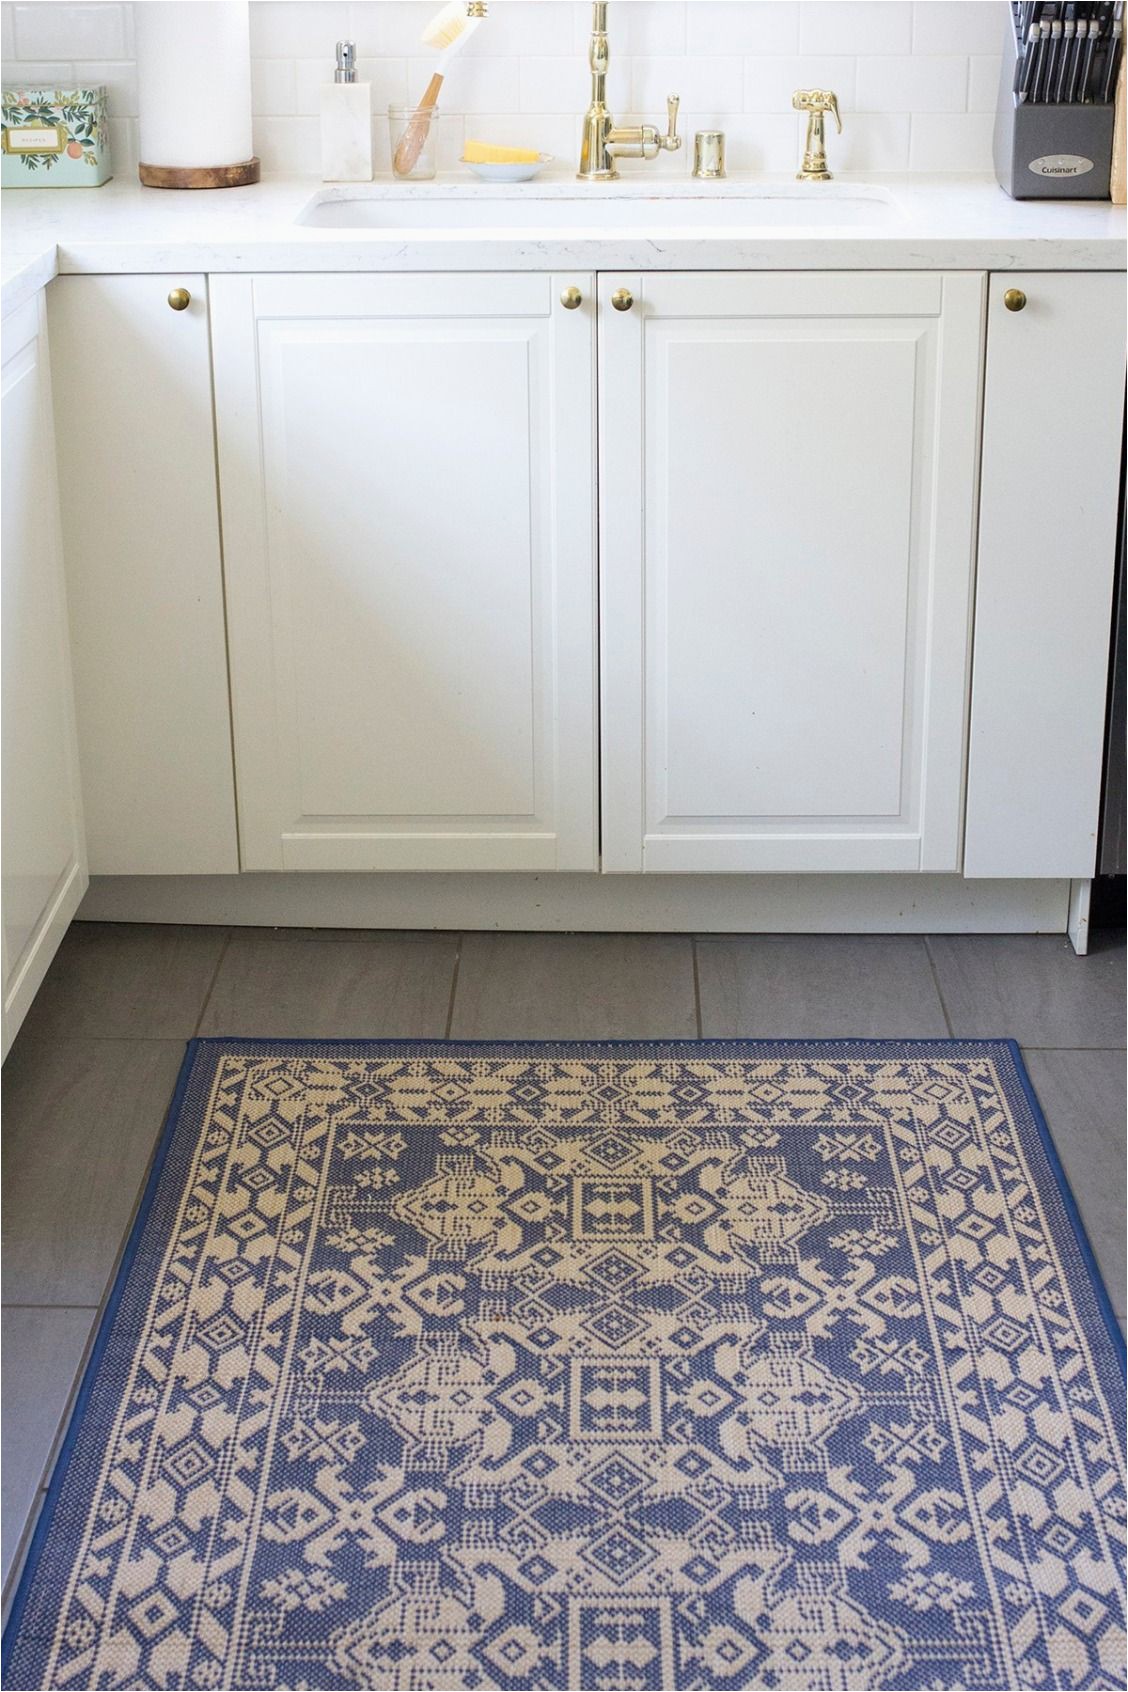 Bed Bath and Beyond Rugs Kitchen Magnolia Home Rug for My Kitchen Refresh with Bed Bath